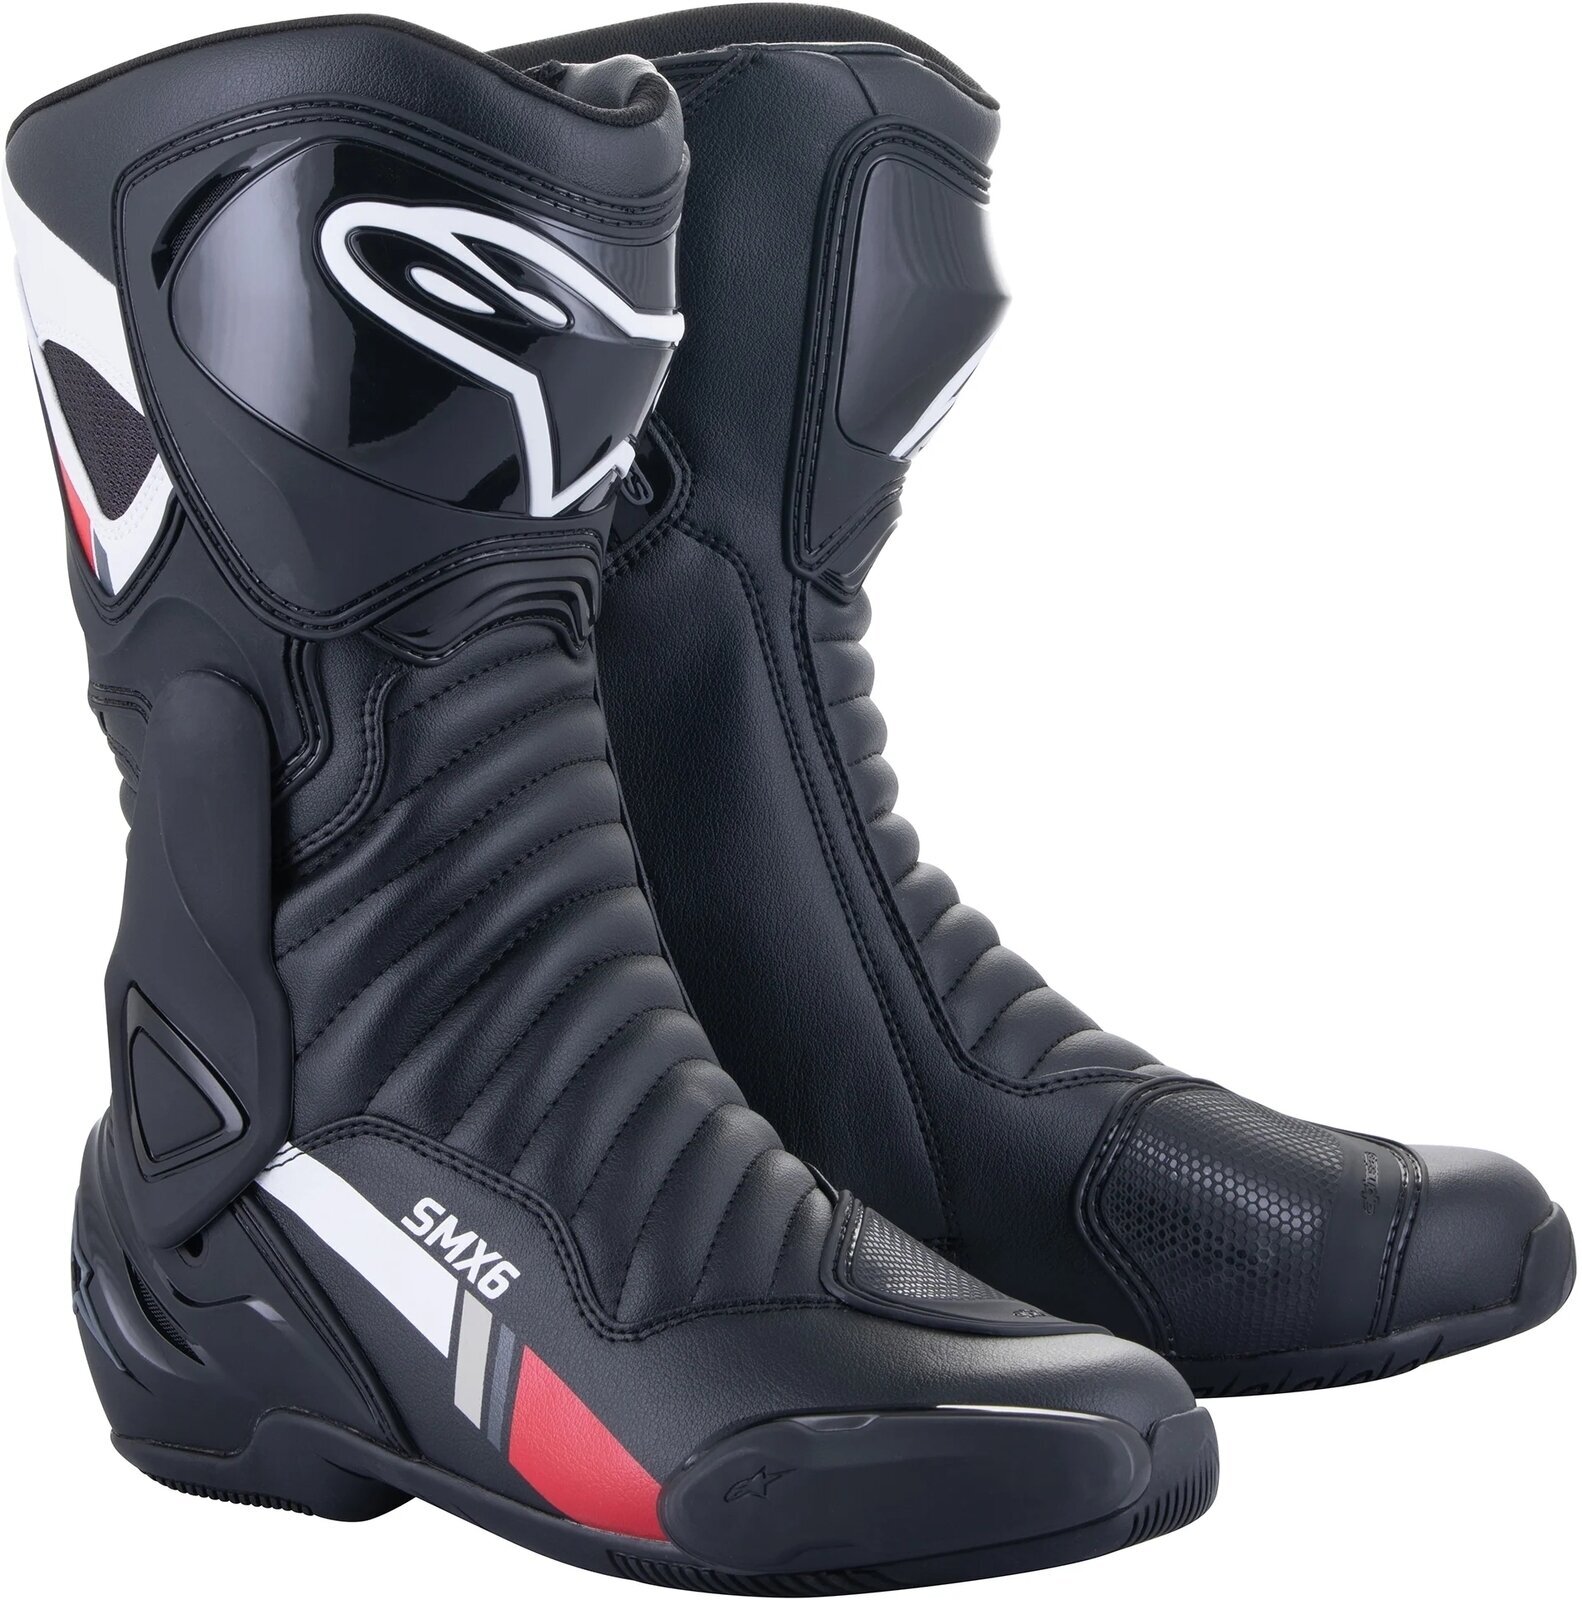 Motorcycle Boots Alpinestars SMX-6 V2 Boots Black/White/Gray 45 Motorcycle Boots